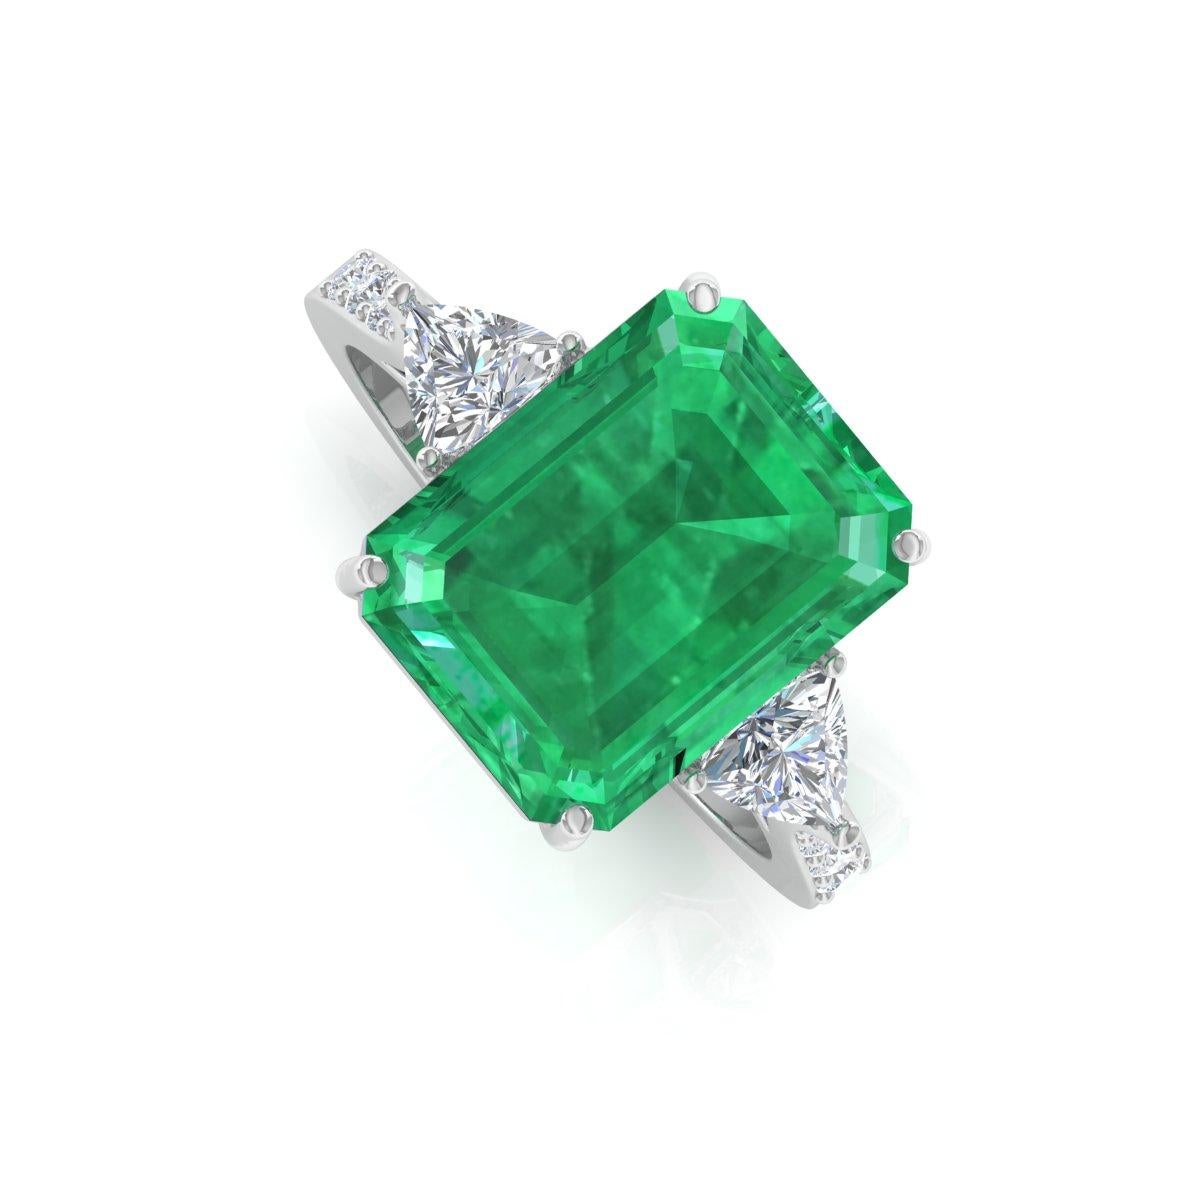 For Sale:  Natural Emerald Gemstone Ring Trillion Cut Diamond Solid 18k White Gold Jewelry 8